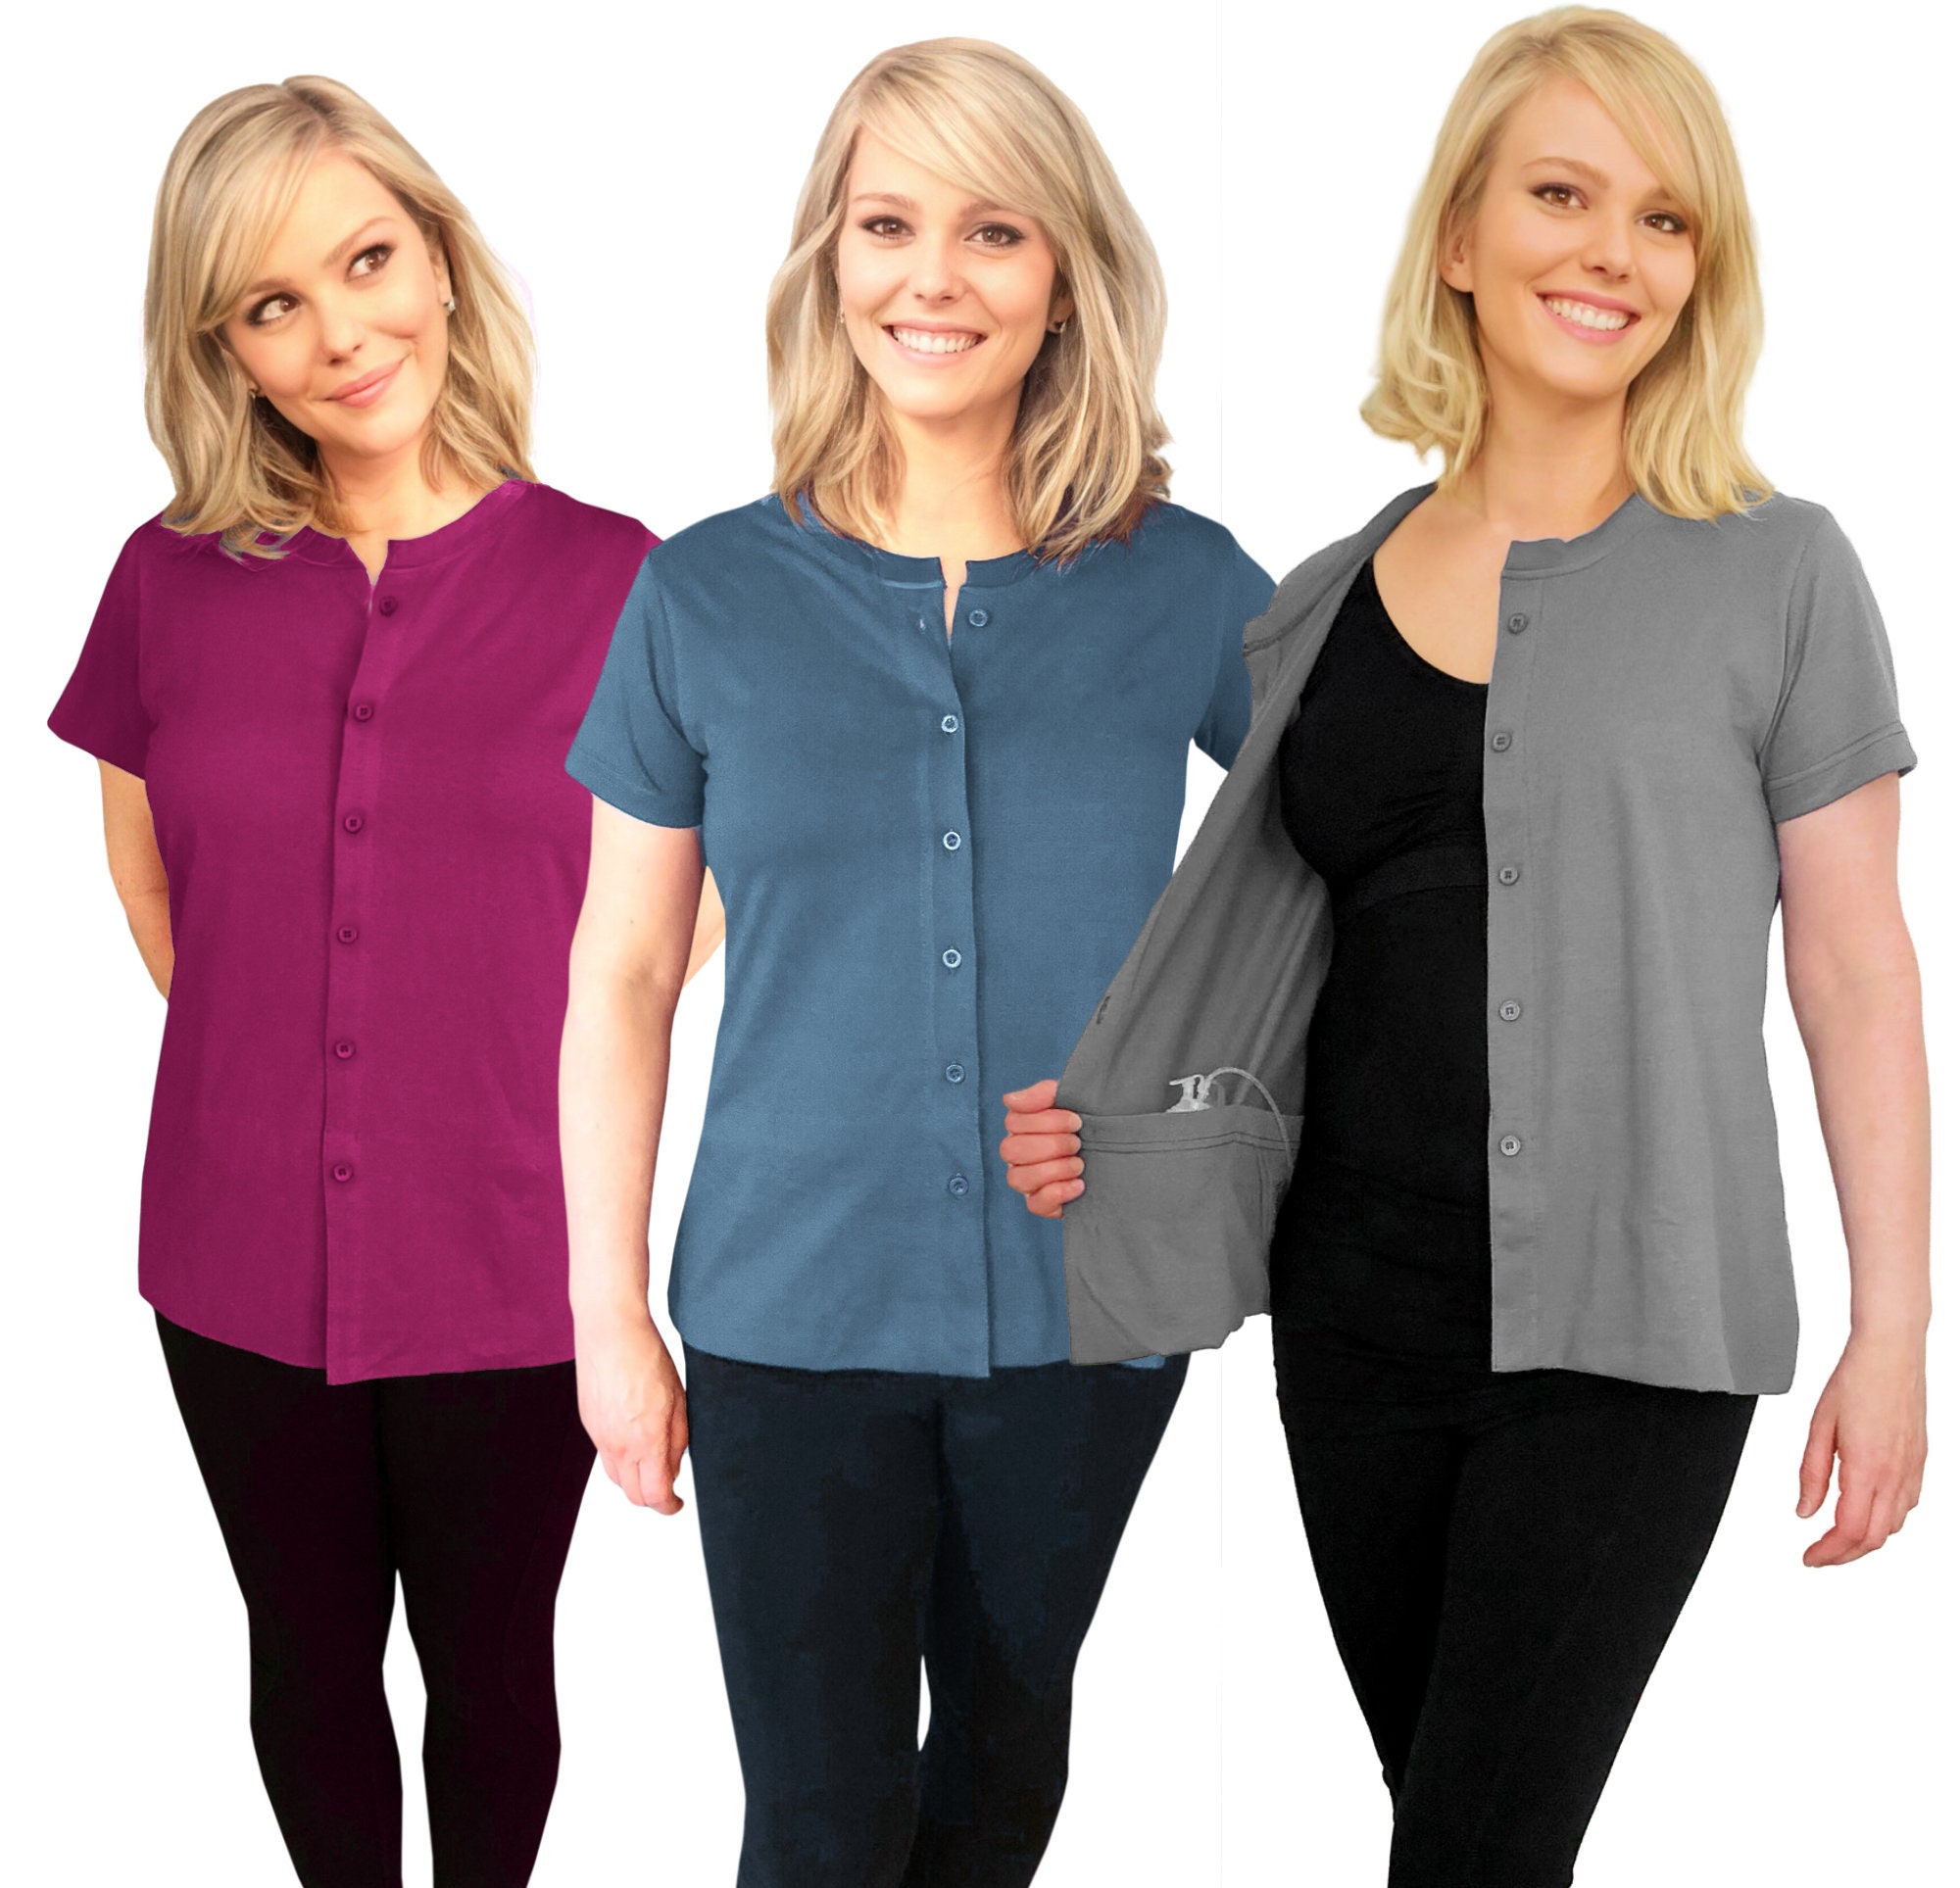 Mastectomy Recovery Clothing Tops to Hold Drains Breast Cancer